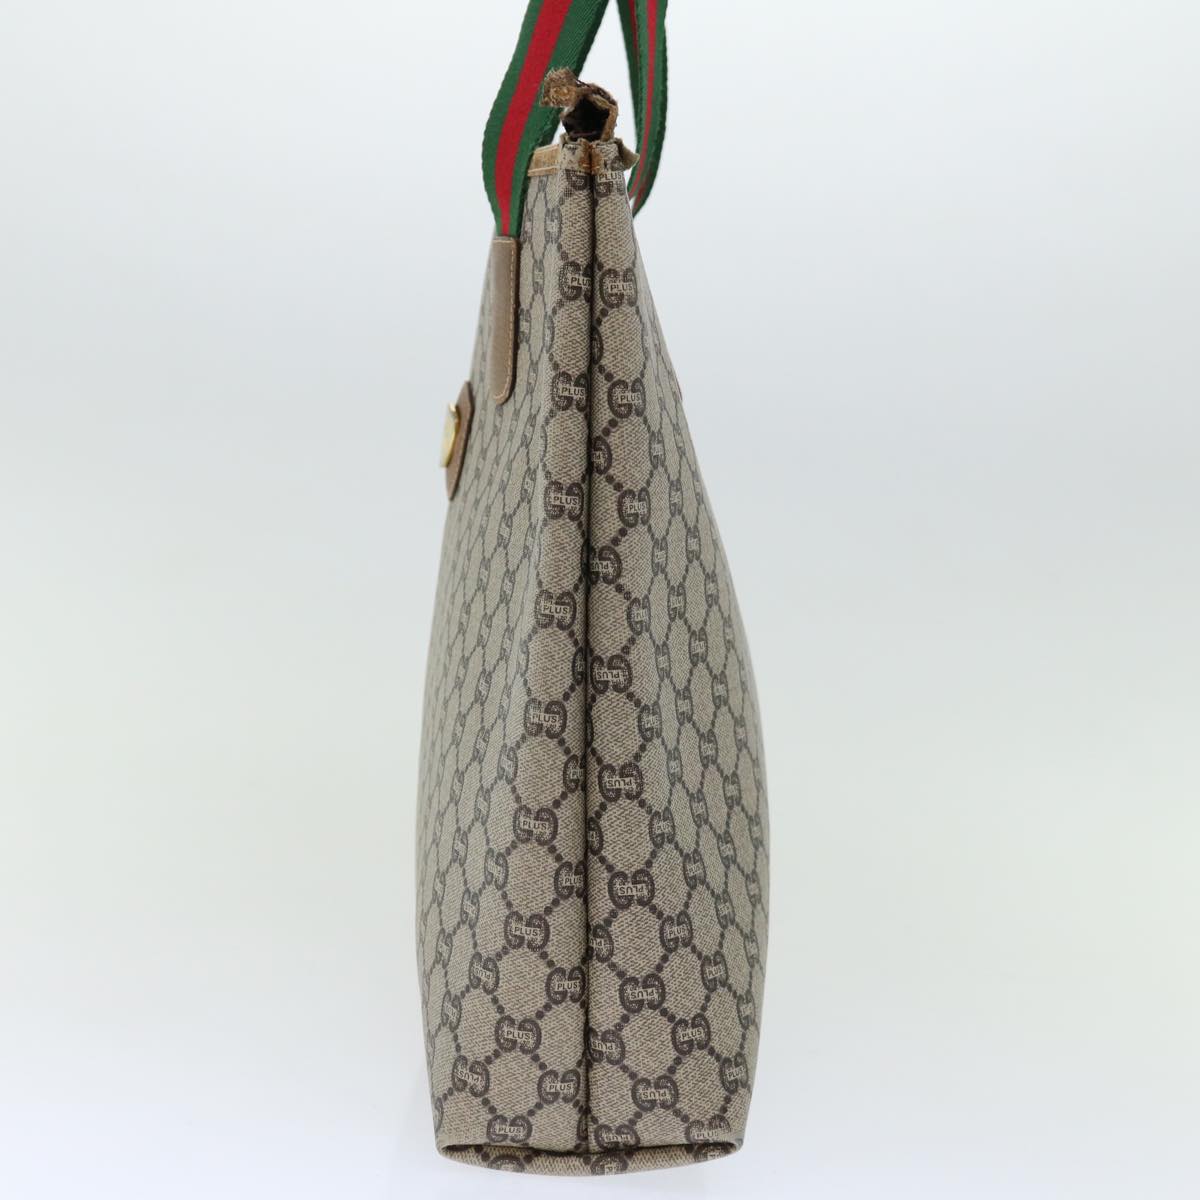 GUCCI GG Plus Supreme Web Sherry Line Tote Bag PVC Beige Green Red Auth 69790